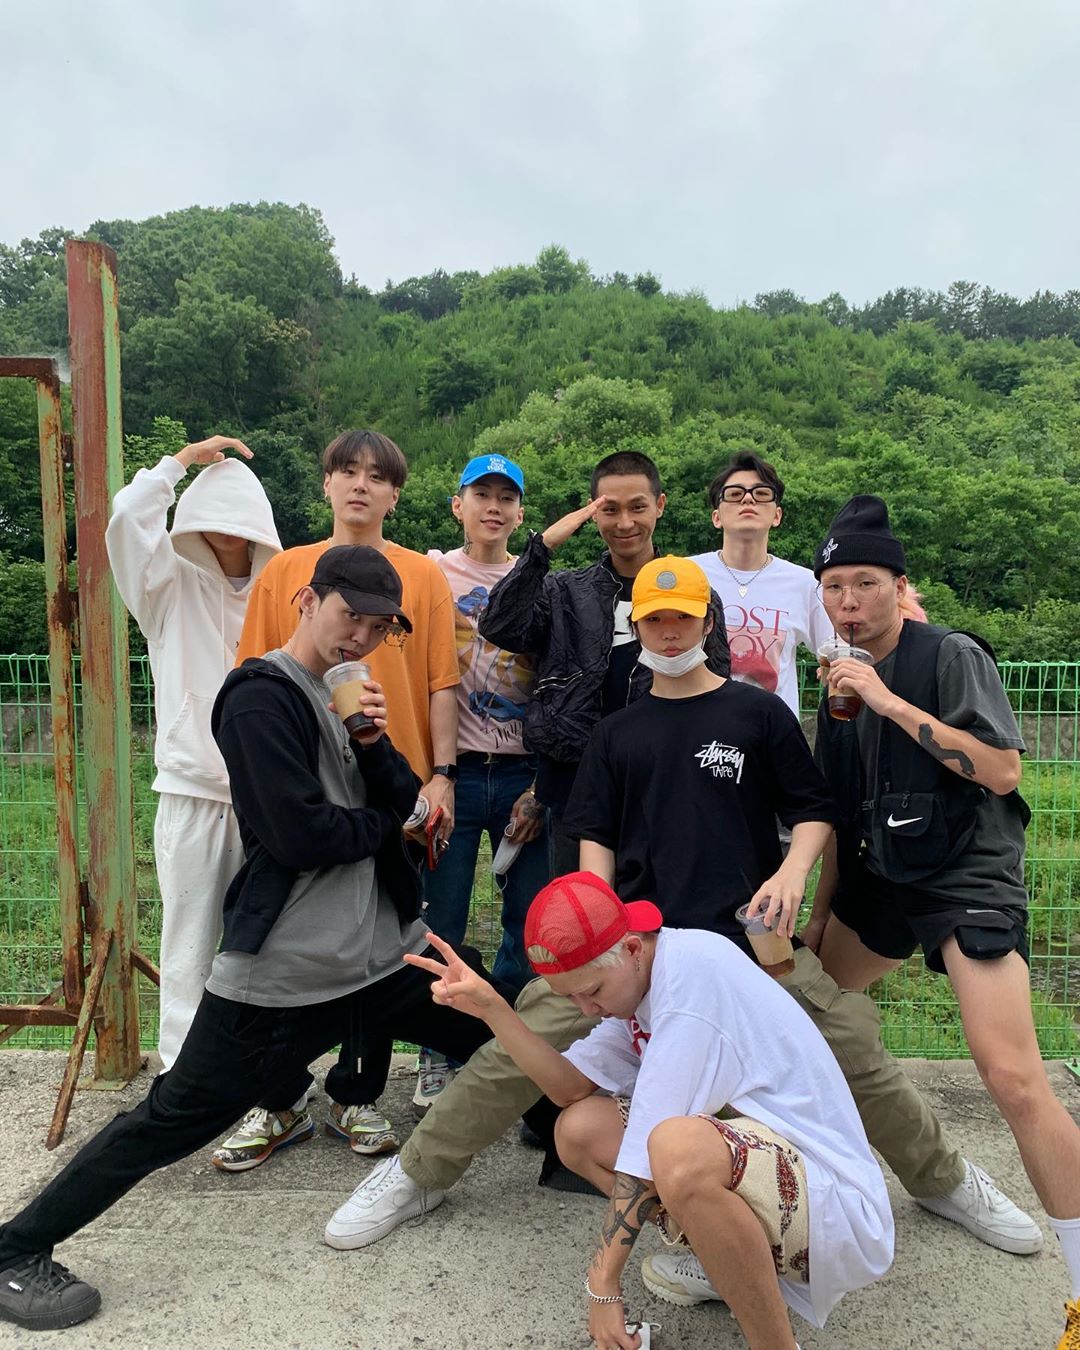 sik-k-enlists-in-army-after-saying-goodbye-to-h1ghr-musics-artists-on-june-29-2